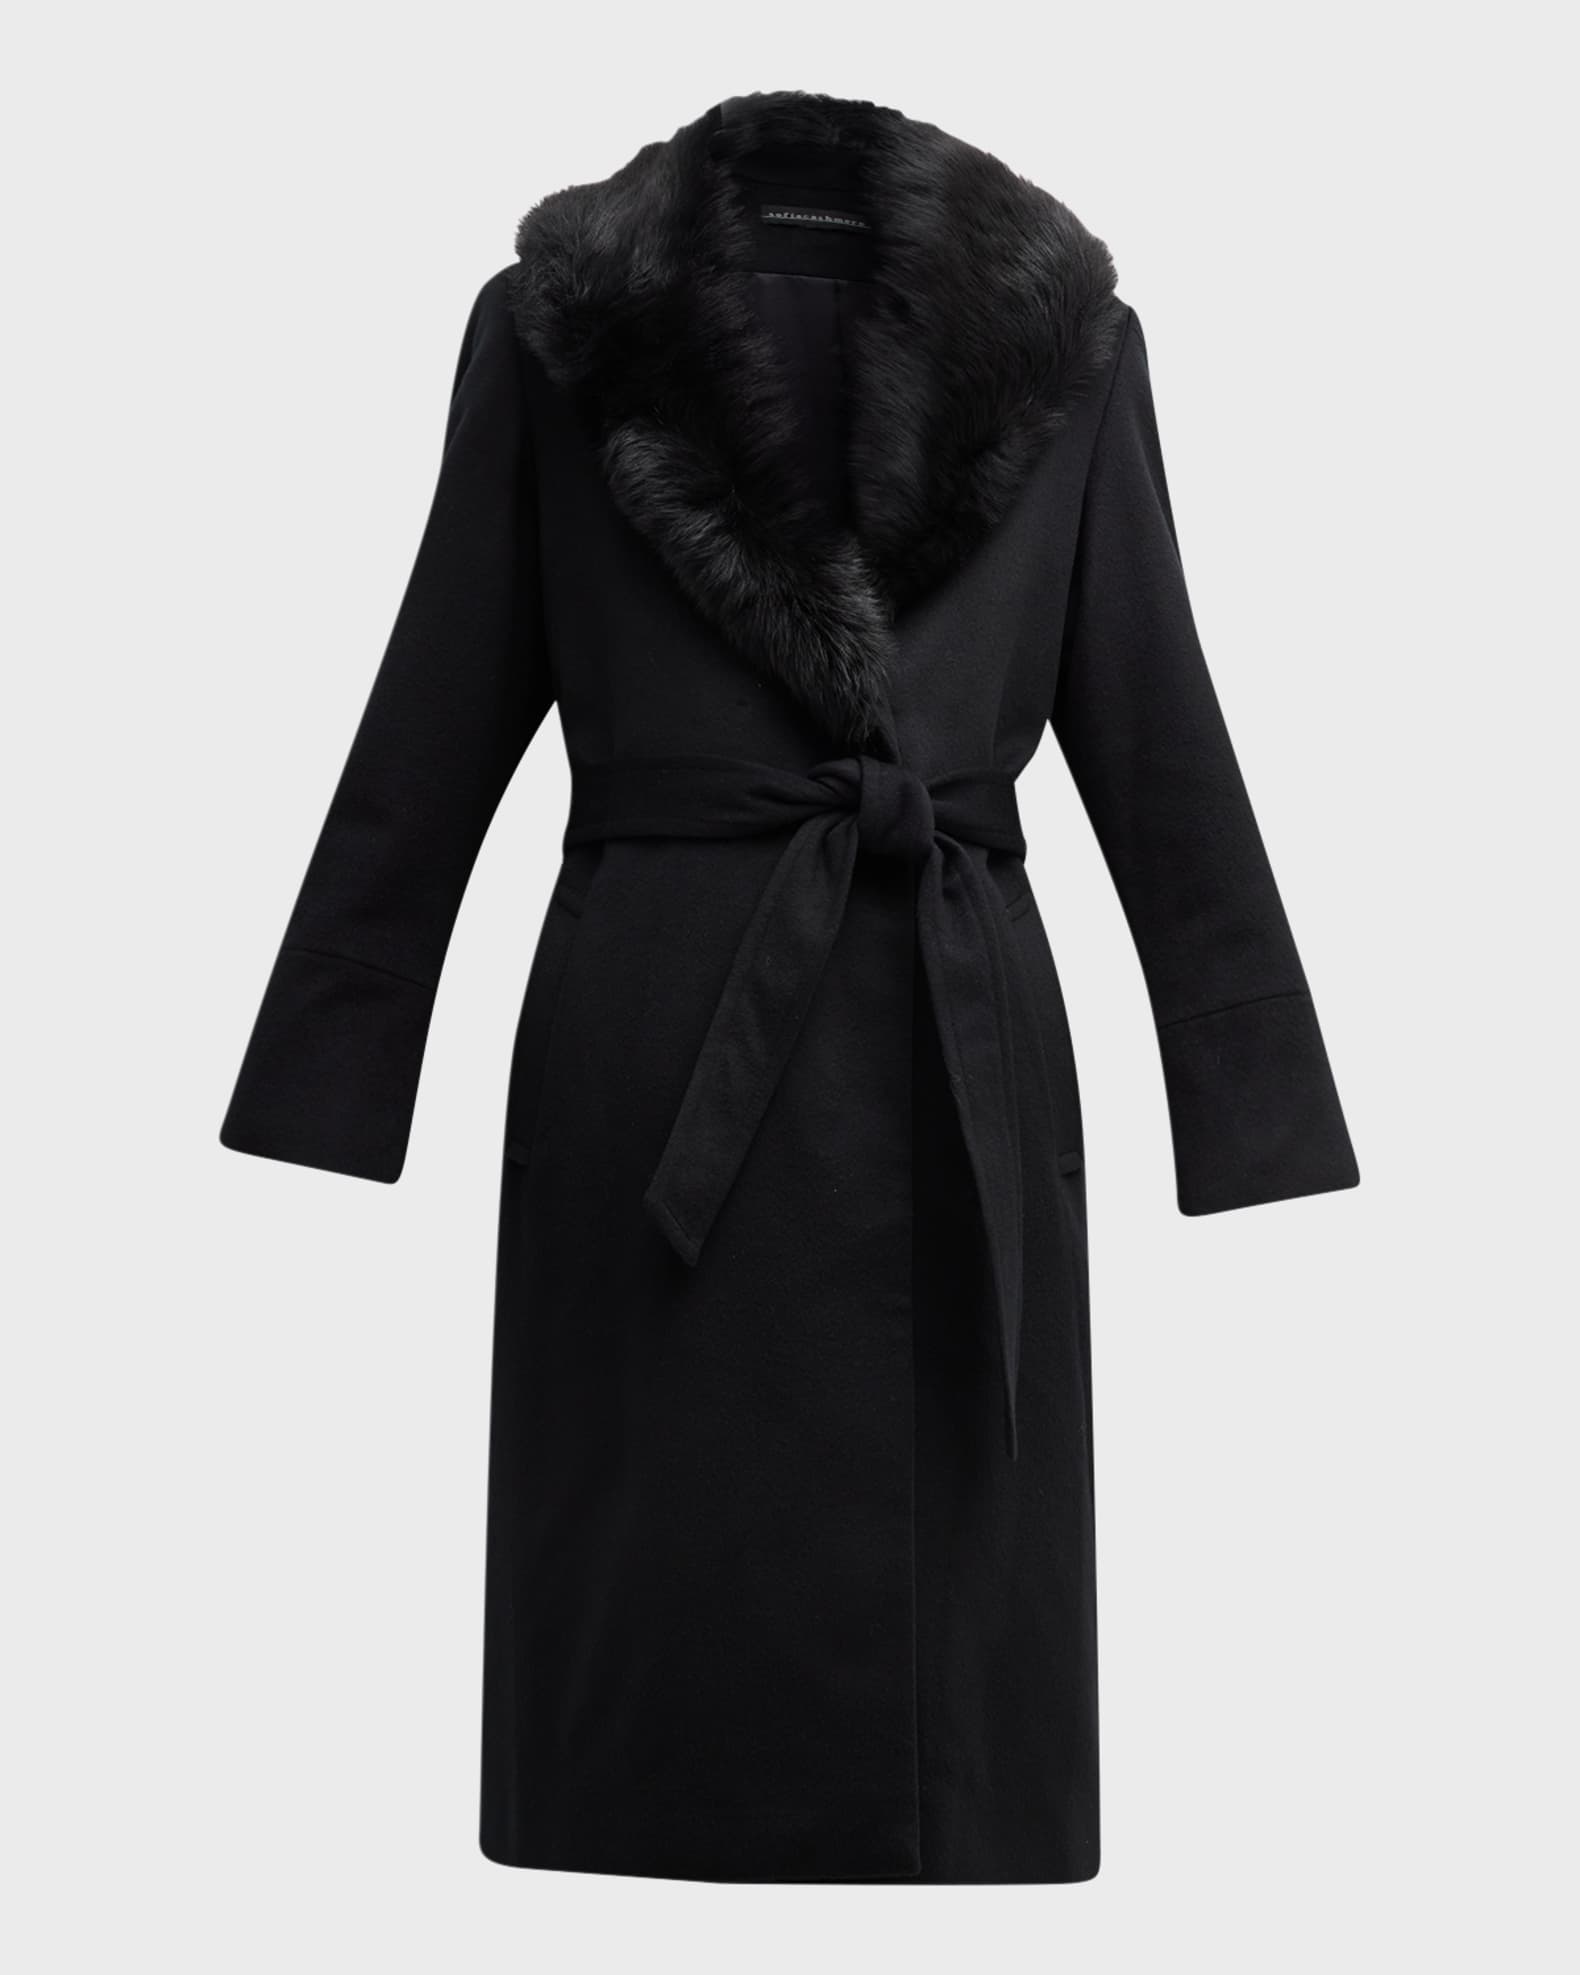 Sofia Cashmere Cashmere Wrap Coat with Shearling Collar | Neiman Marcus